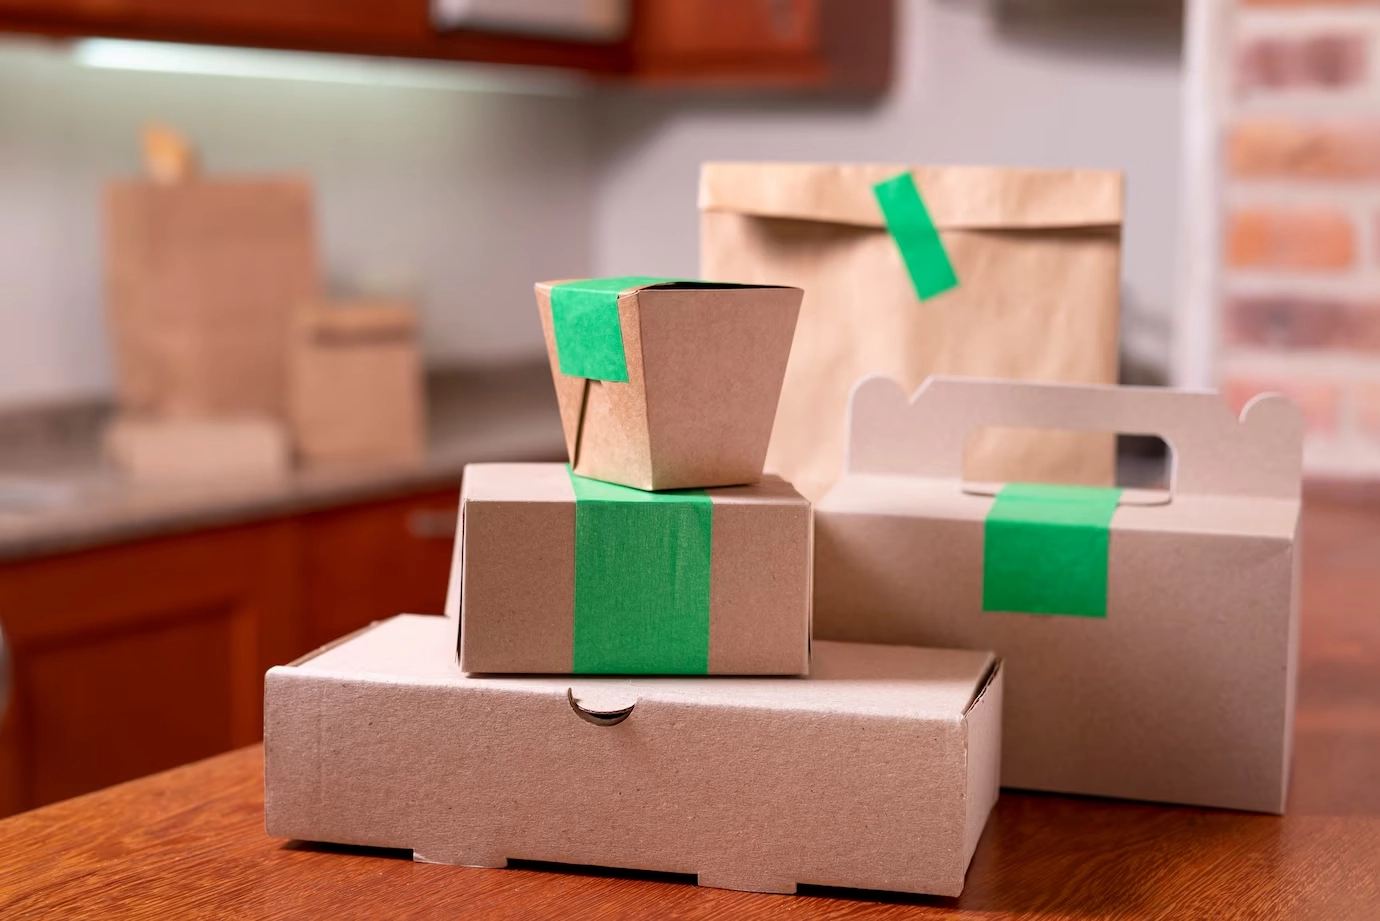 Pop up your brand’s worth via 7 small business packaging ideas